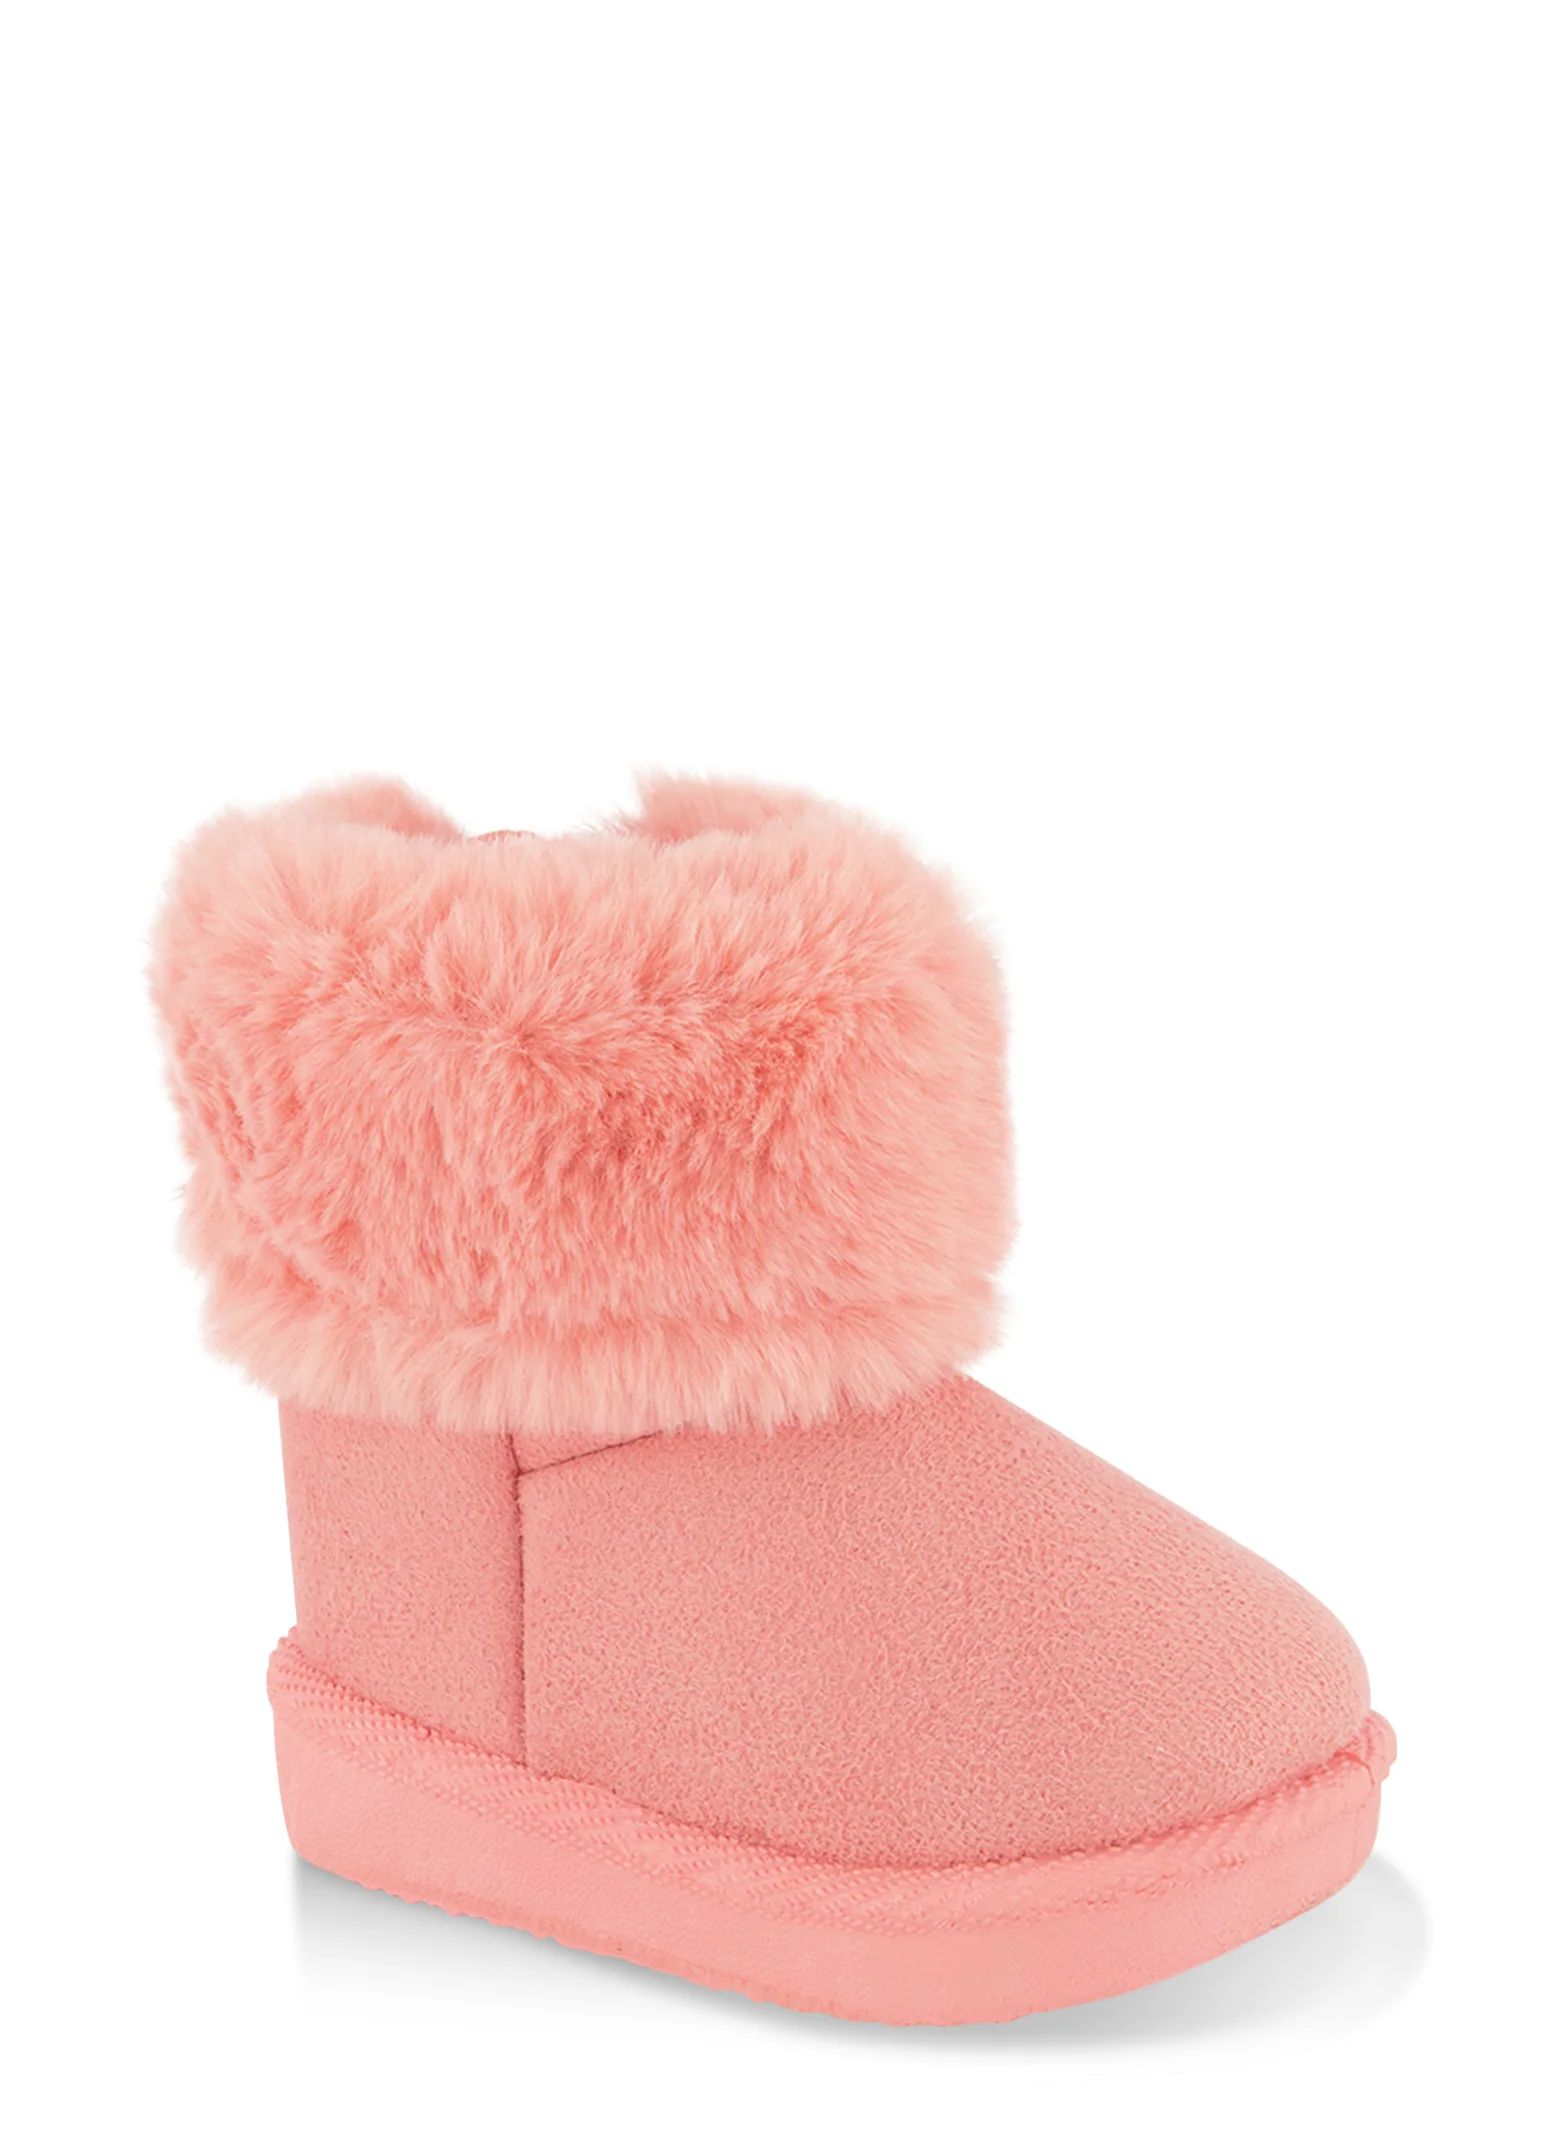 Baby Girls Solid Faux Fur Cuff Boots  - Pink | Rainbow Shops